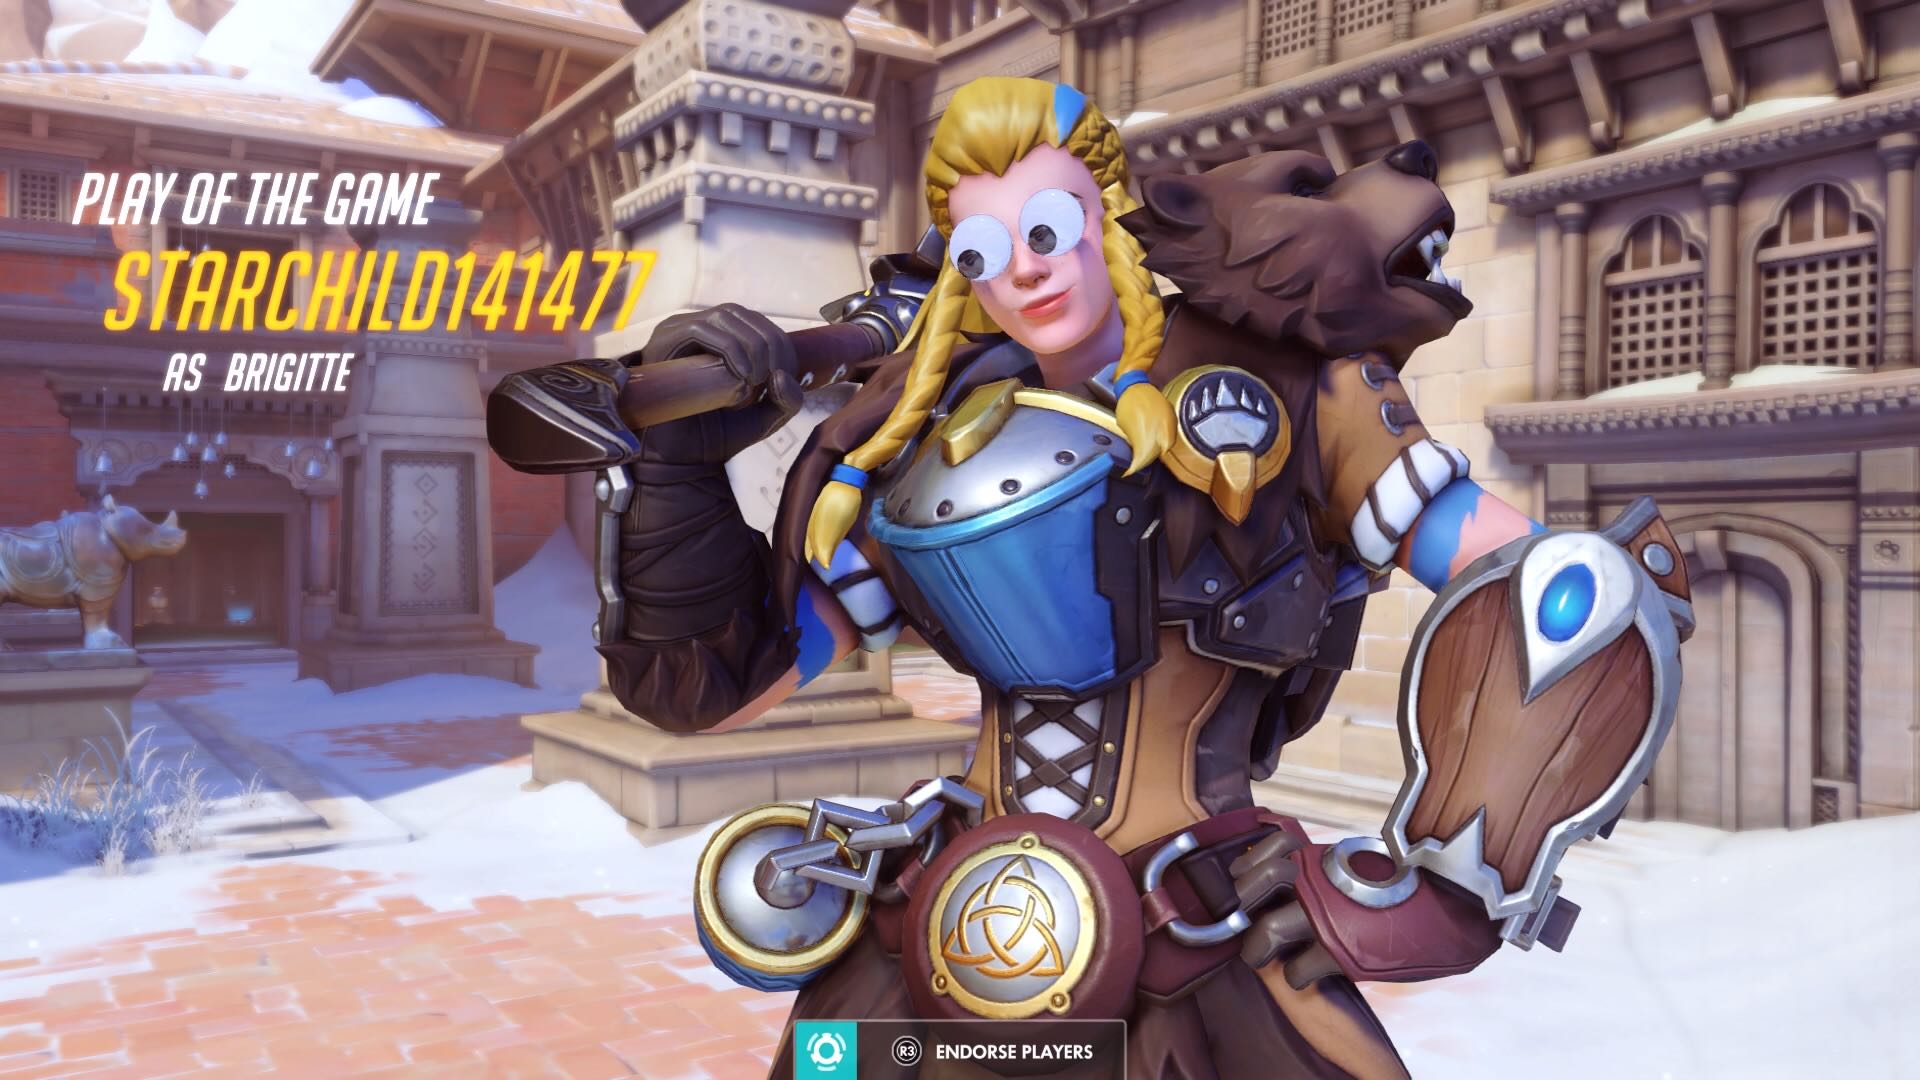 Overwatch Players Are Getting Pranked a Day Early for April Fools